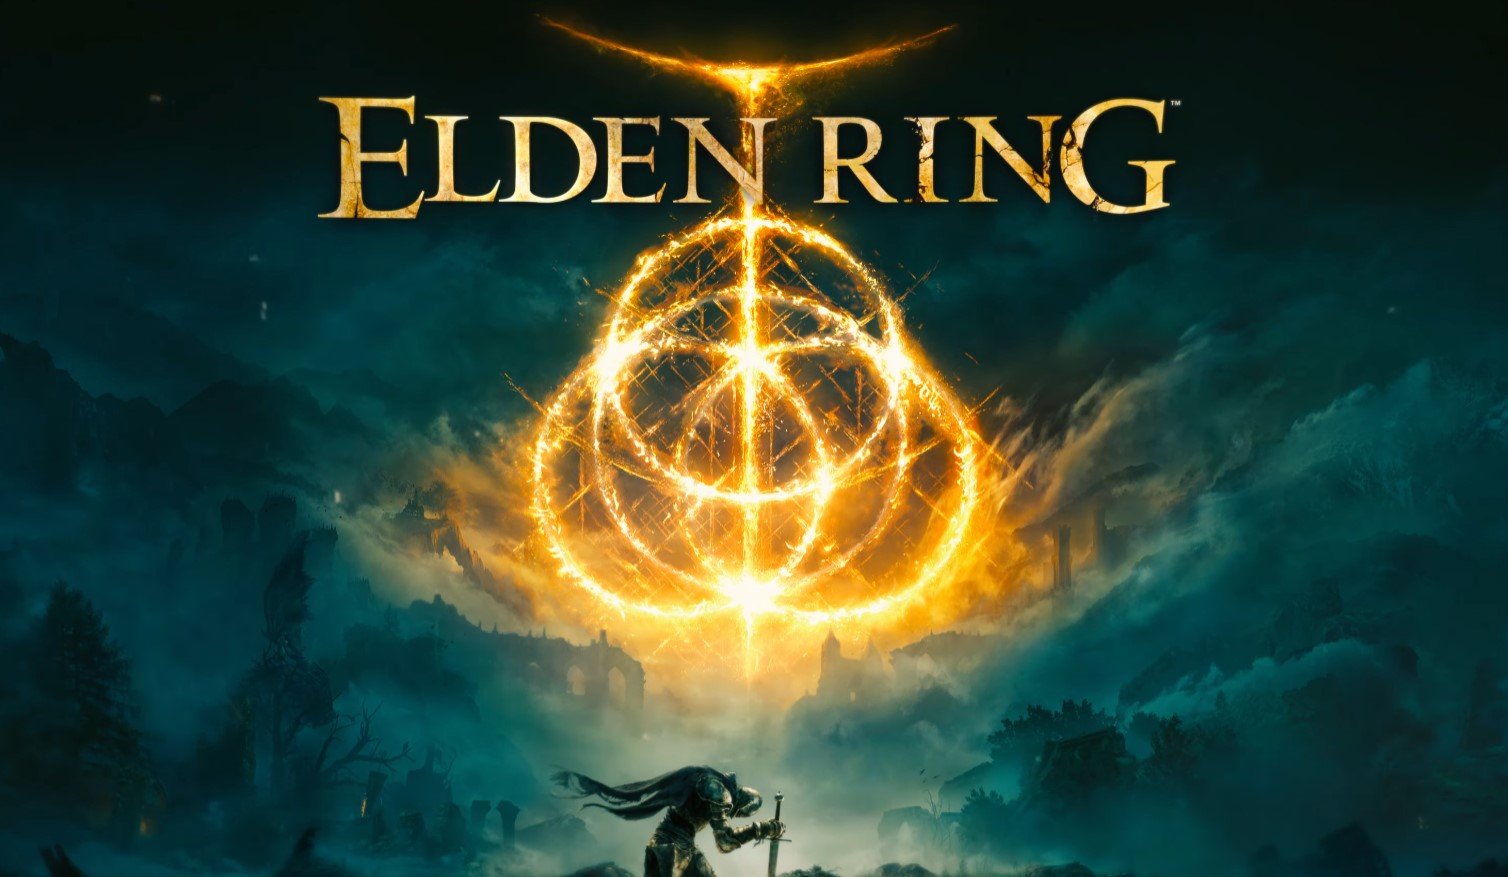 elden-ring-has-finally-reappeared-with-a-new-trailer-and-2022-release